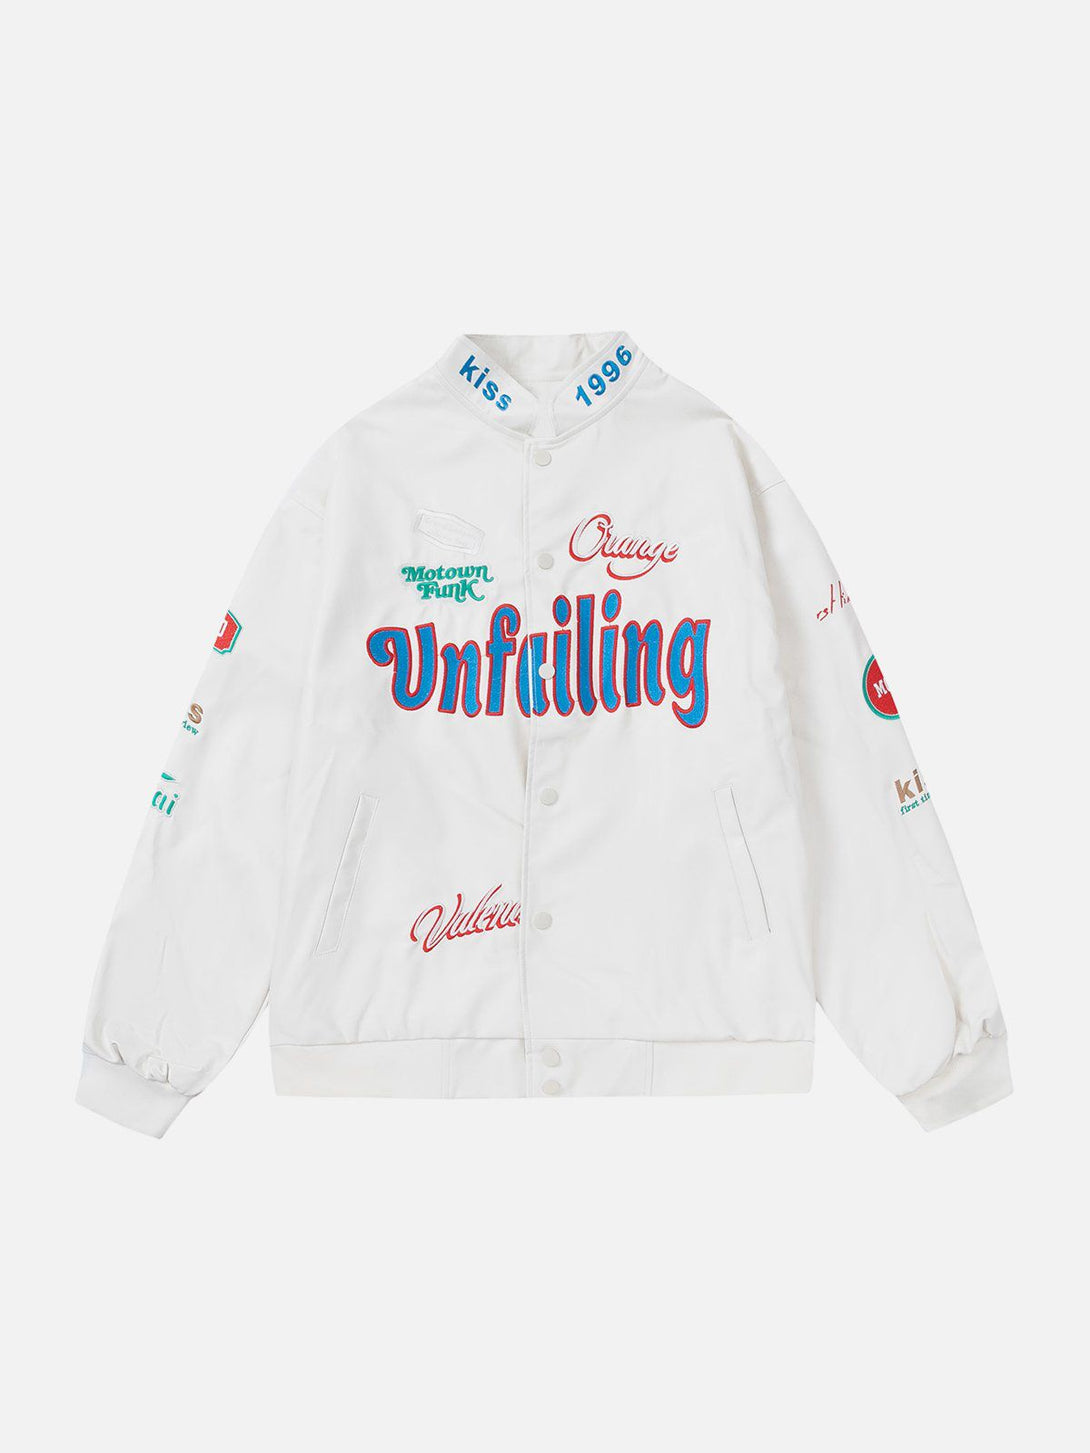 Majesda® - Embroidered Letter Racing Jackets outfit ideas, streetwear fashion - majesda.com